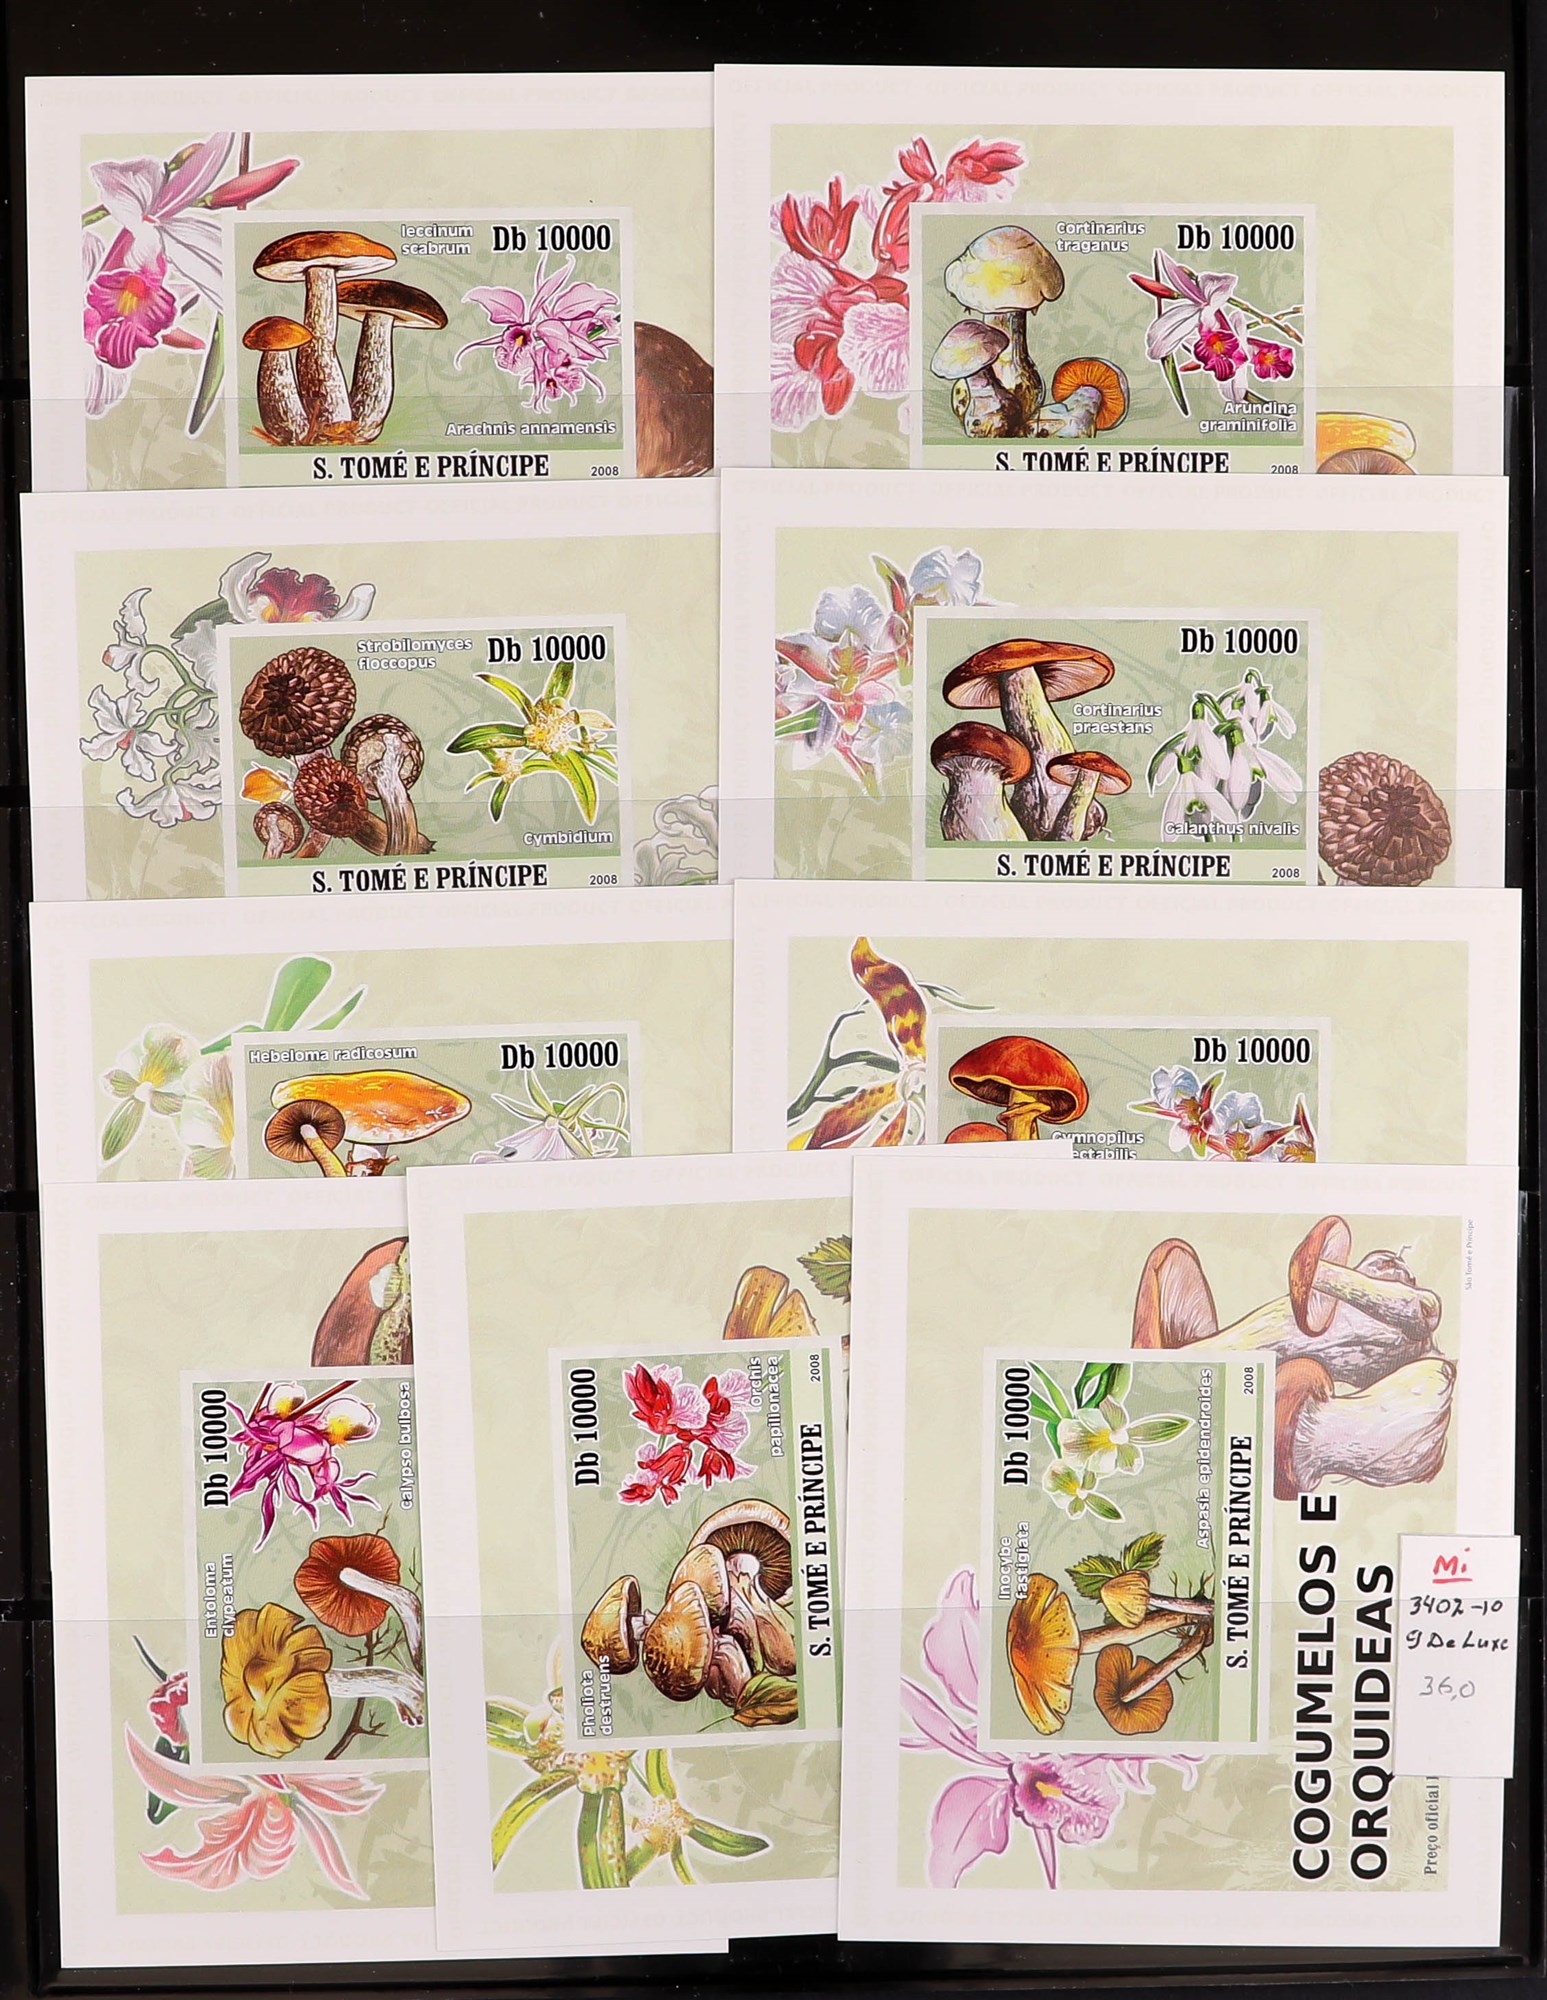 PORTUGUESE COLONIES FUNGI STAMPS OF ST THOMAS & PRINCE ISLANDS 1984 - 2014 never hinged mint - Image 7 of 30